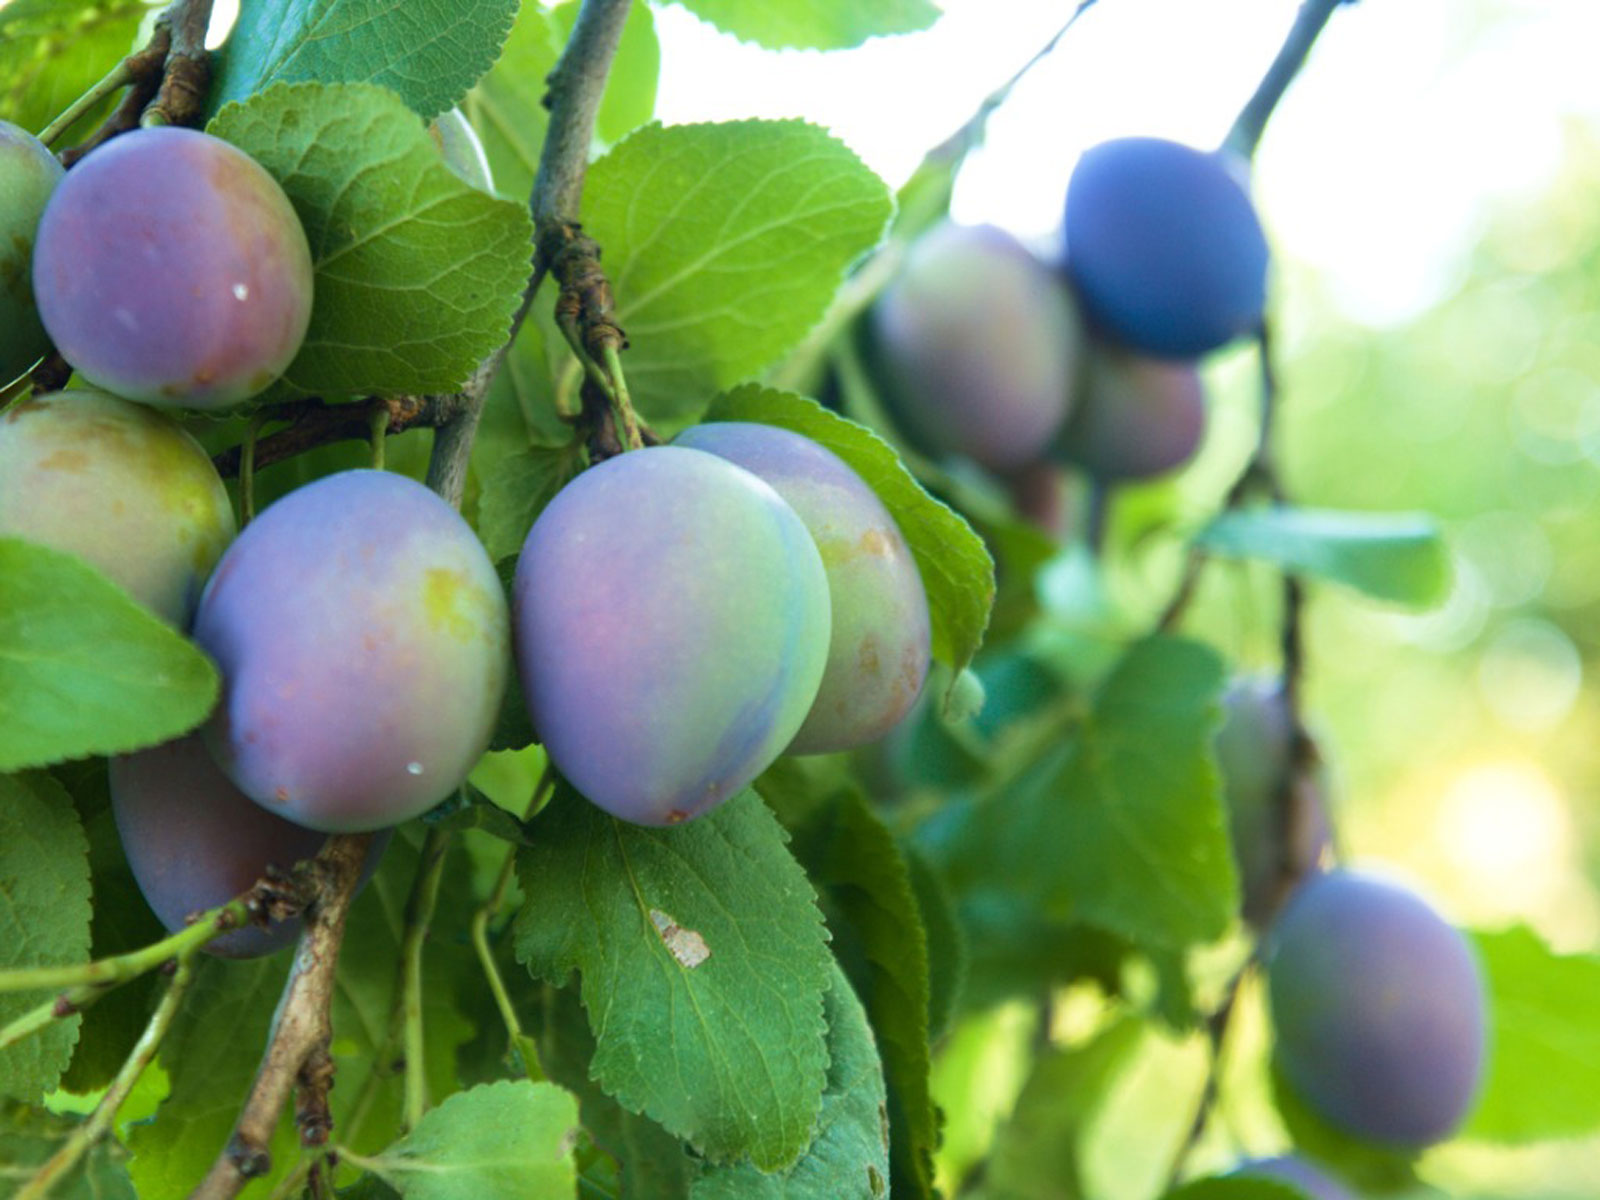 Can You Eat Plums Off A Flowering Plum Tree?